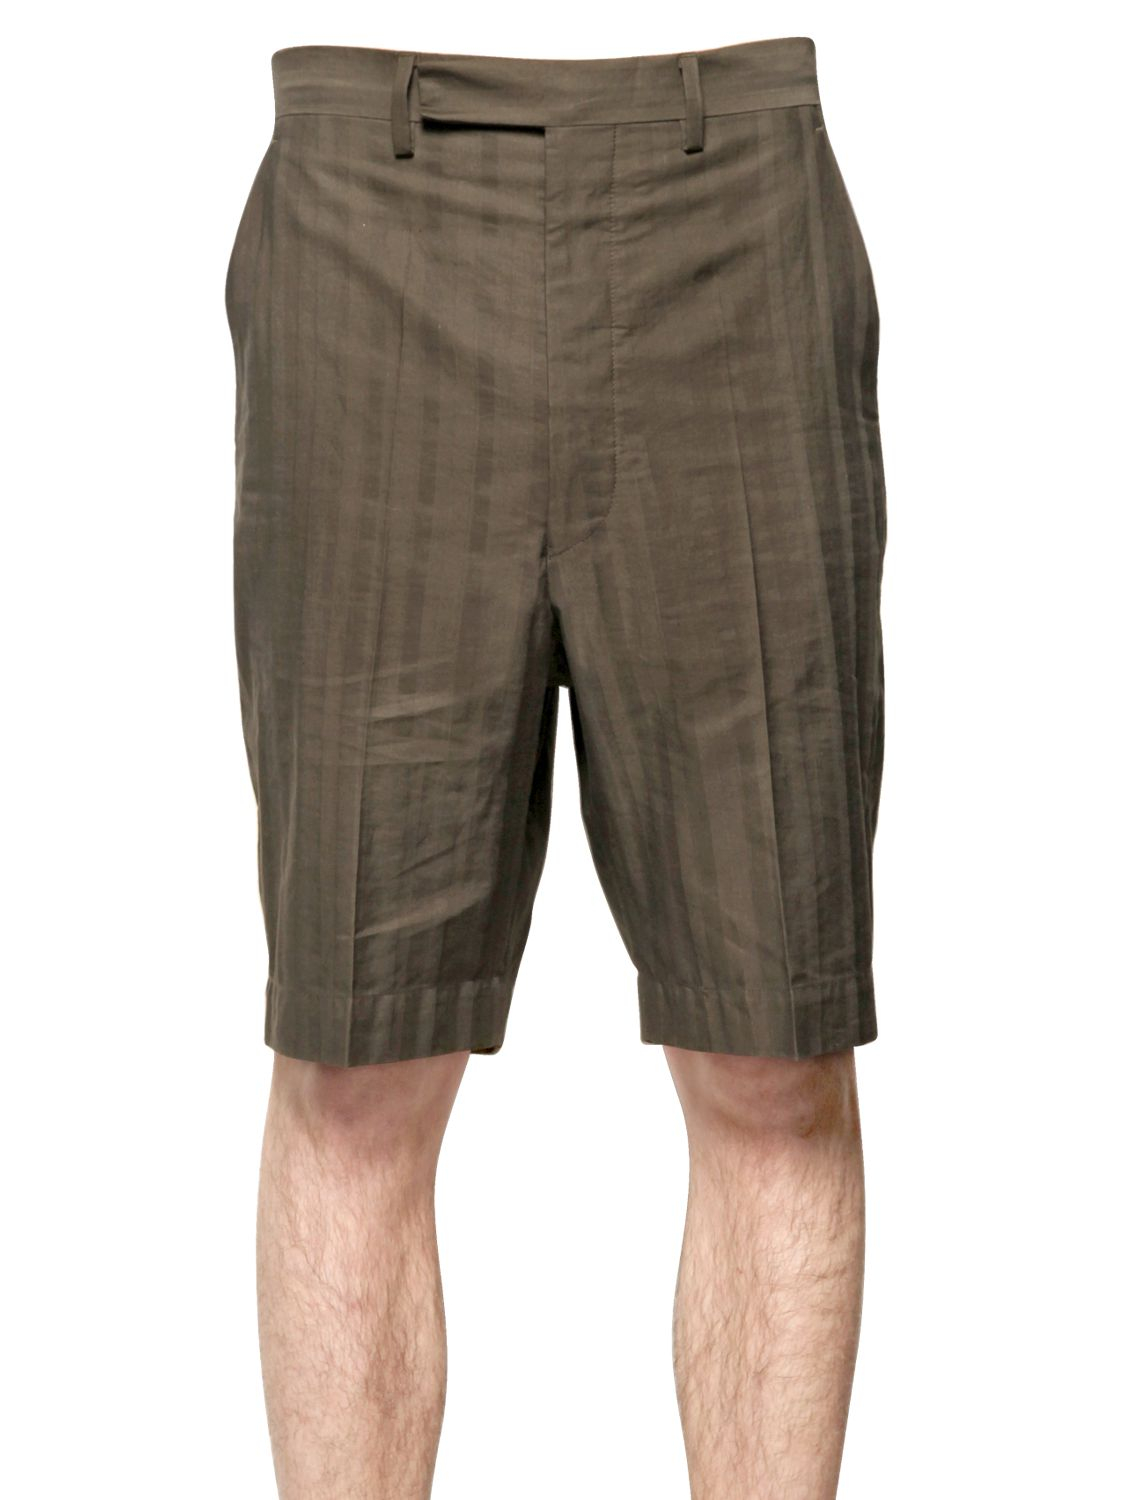 Lyst - Umit Benan Striped Cotton Blend Shorts in Green for Men